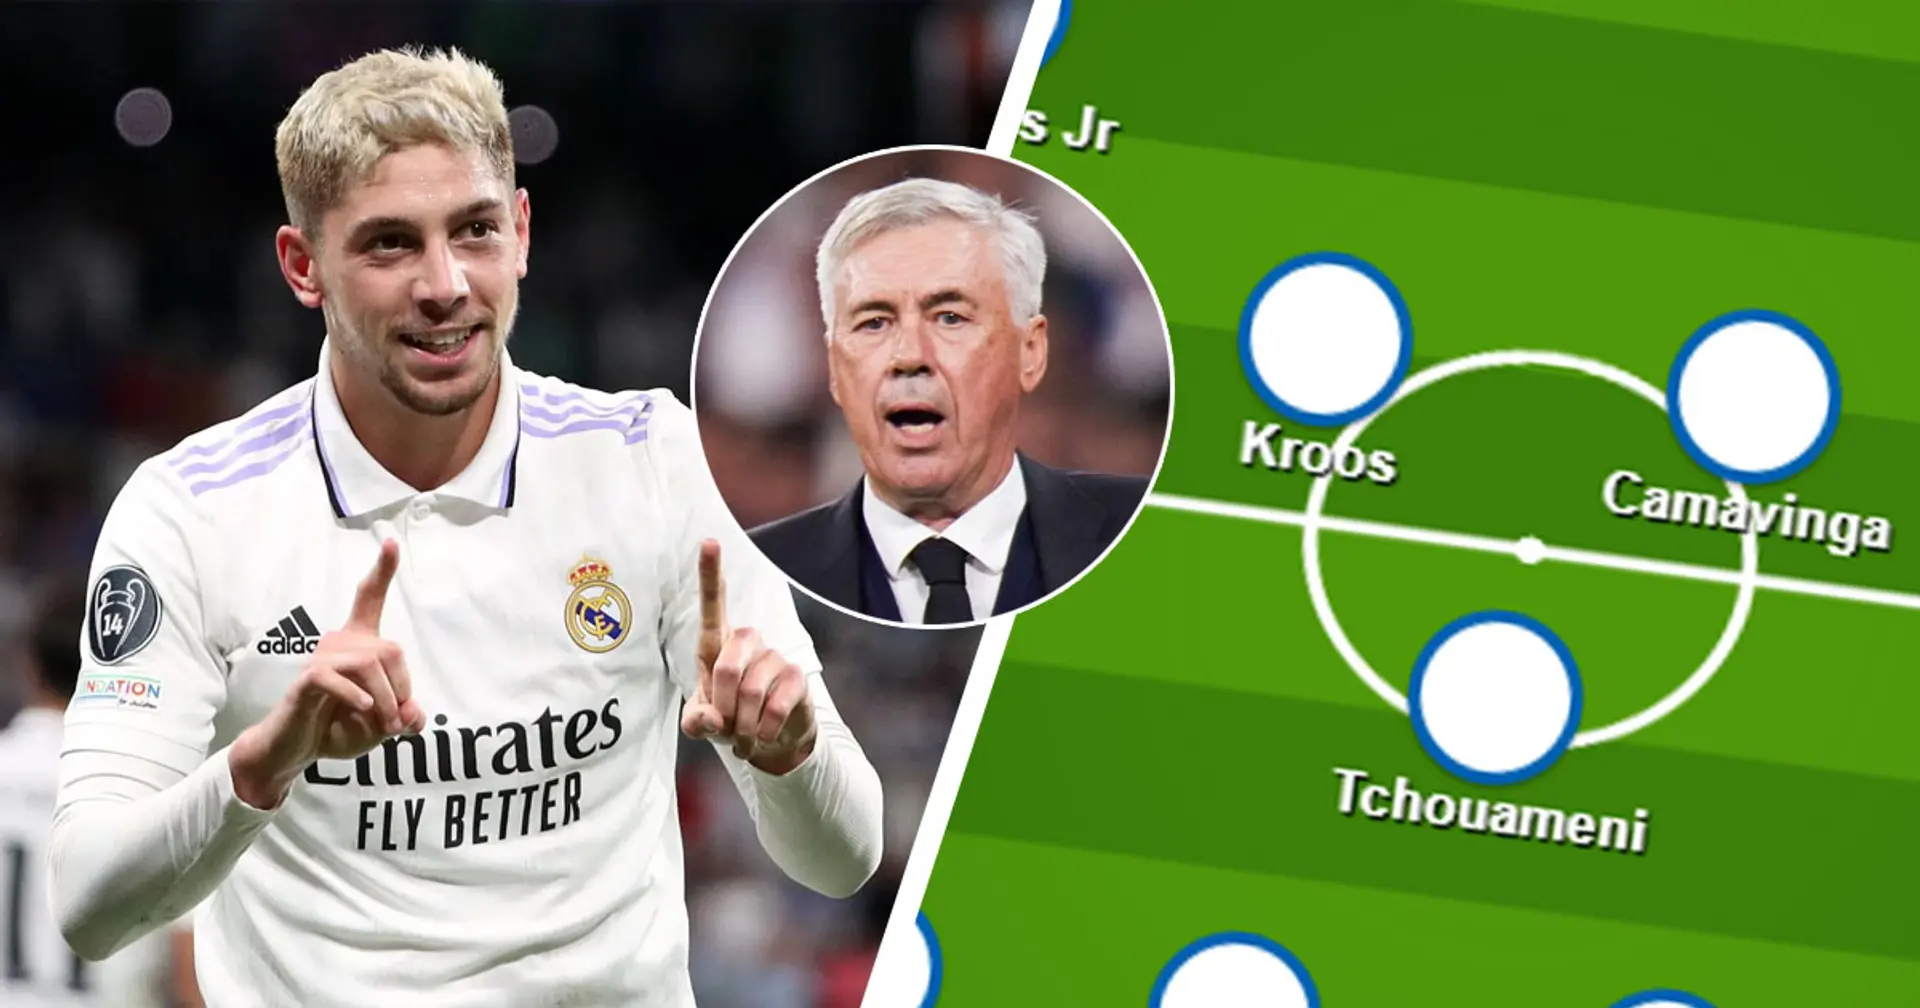 Ancelotti reportedly to rest 4 key players v Shakhtar - shown in lineup